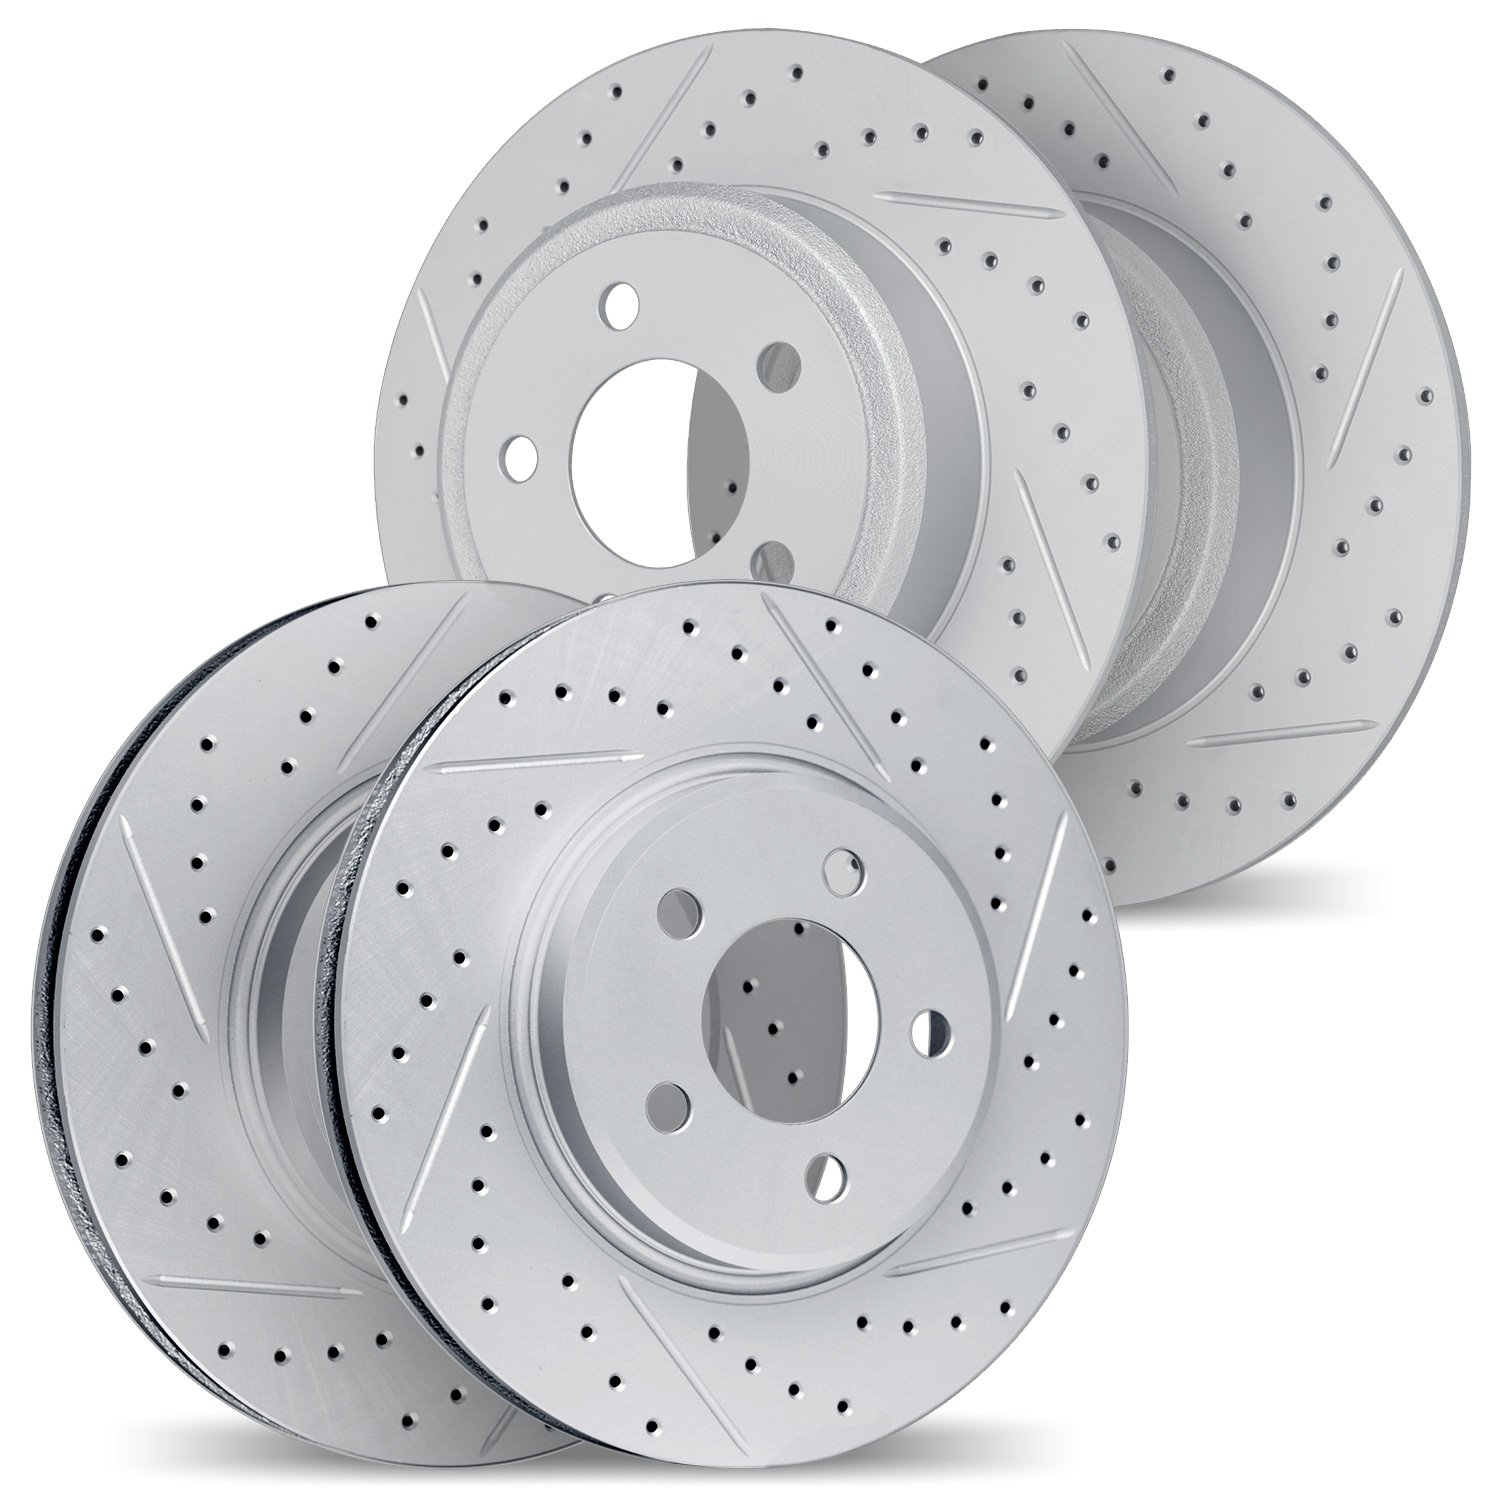 2004-73003 Geoperformance Drilled/Slotted Brake Rotors, 2000-2009 Audi/Volkswagen, Position: Front and Rear